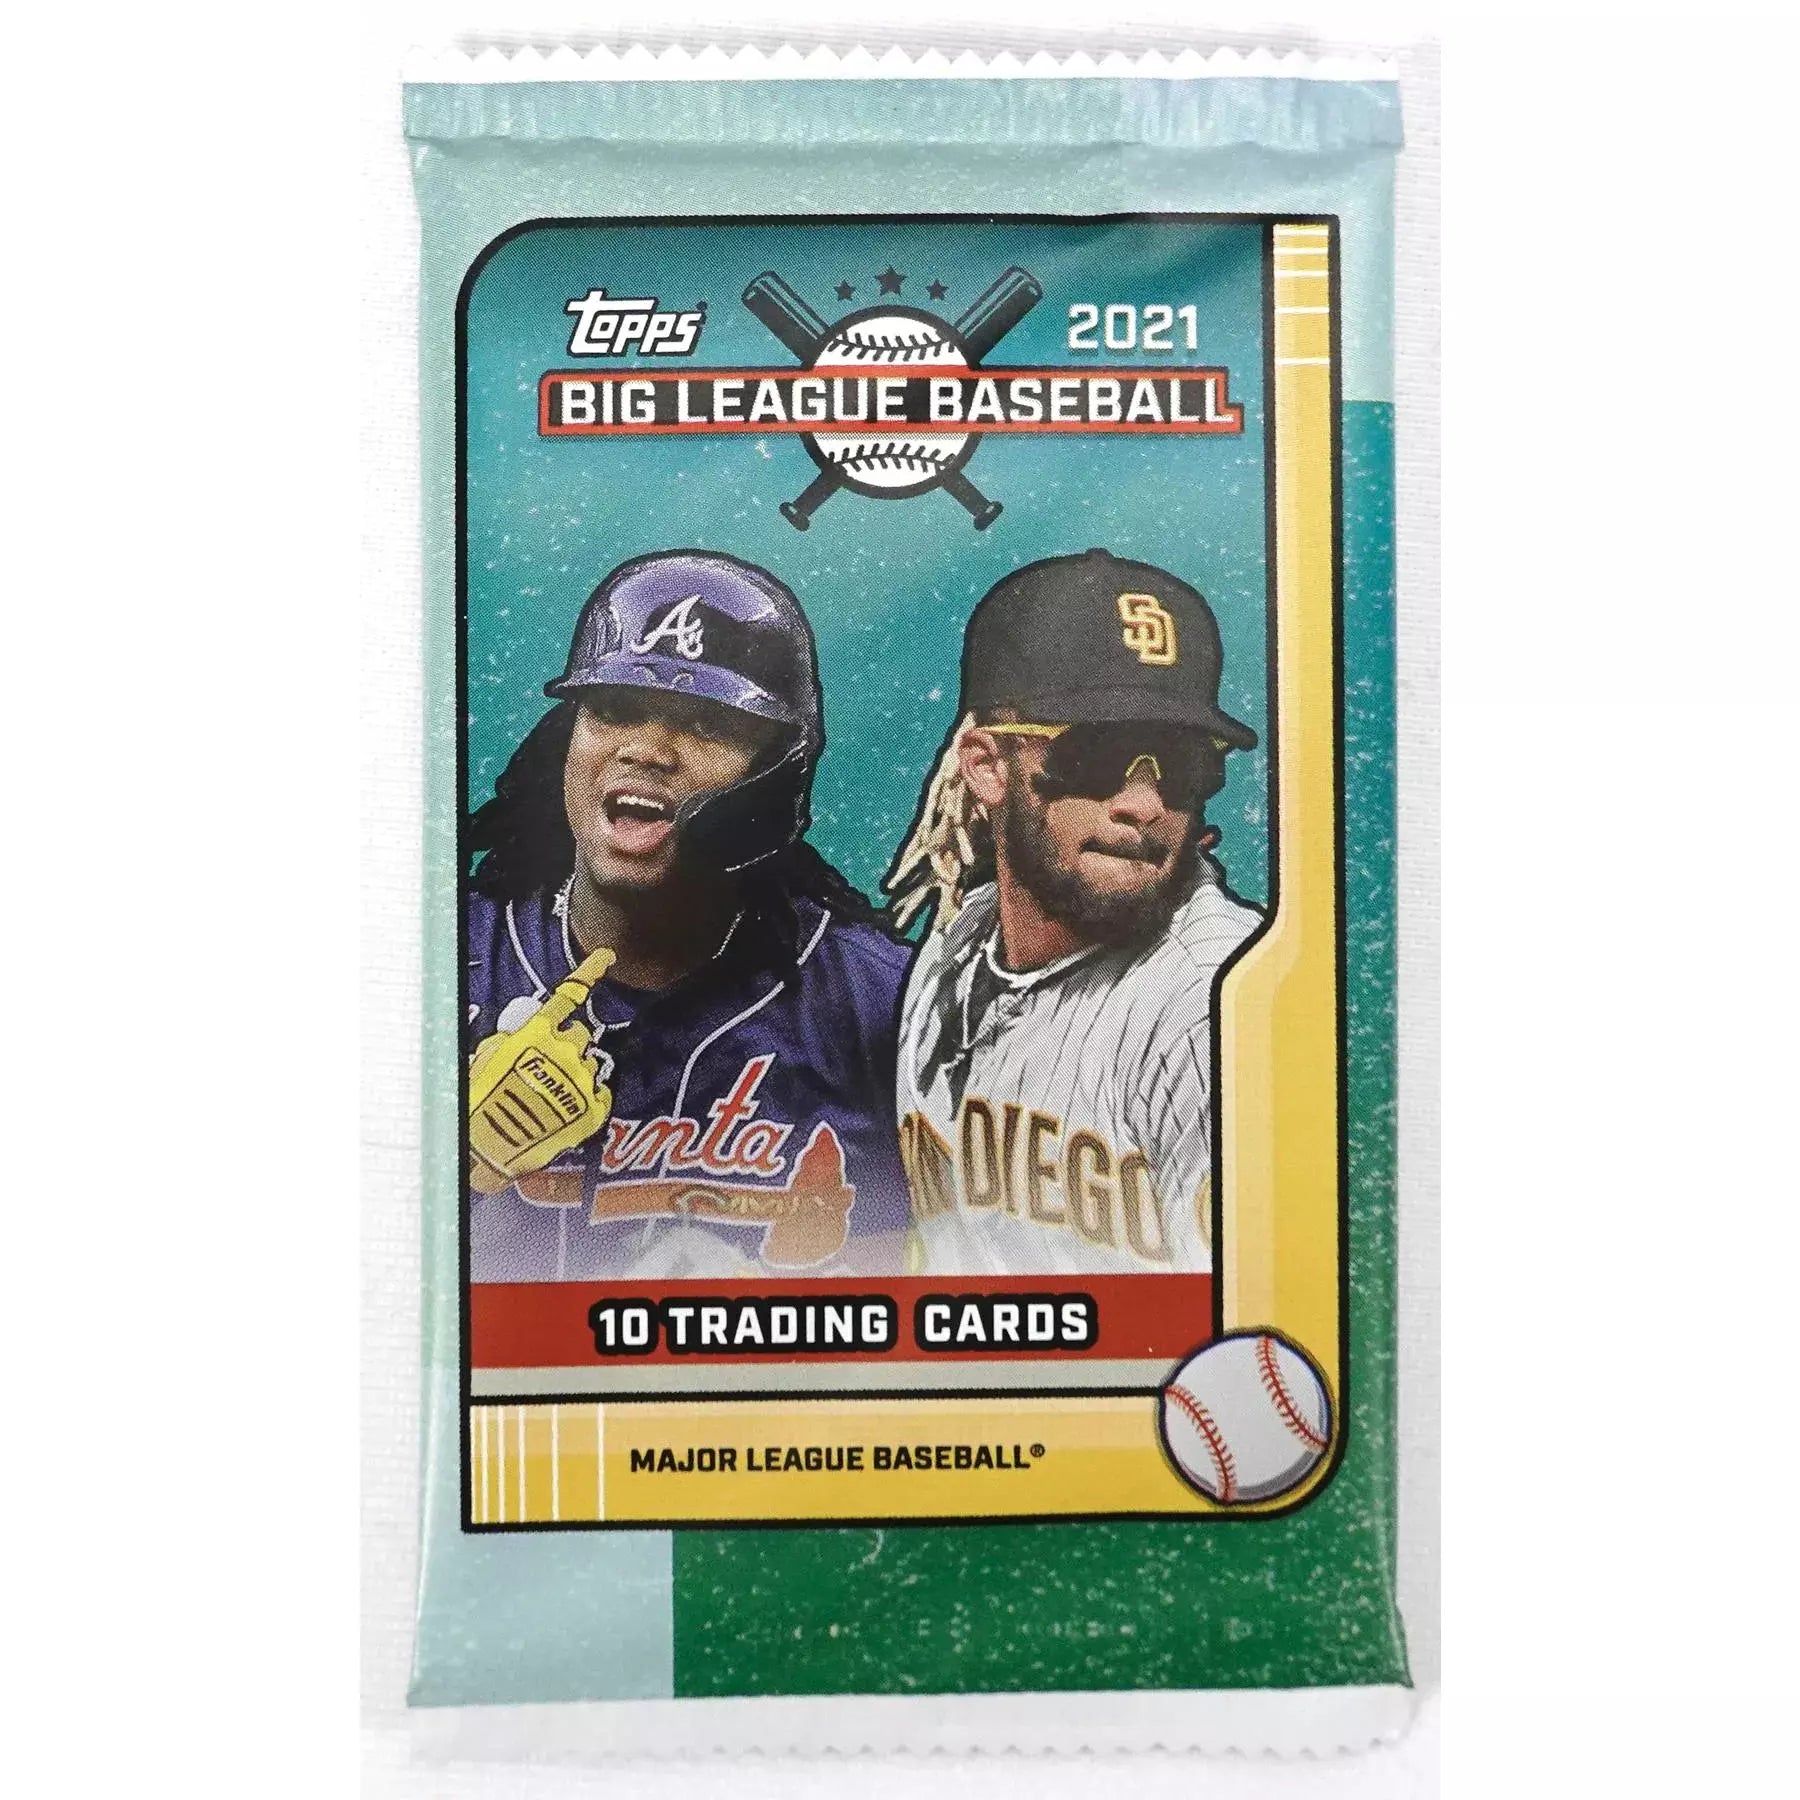  2021 Topps Big League Baseball MLB Hobby Pack  Local Legends Cards & Collectibles